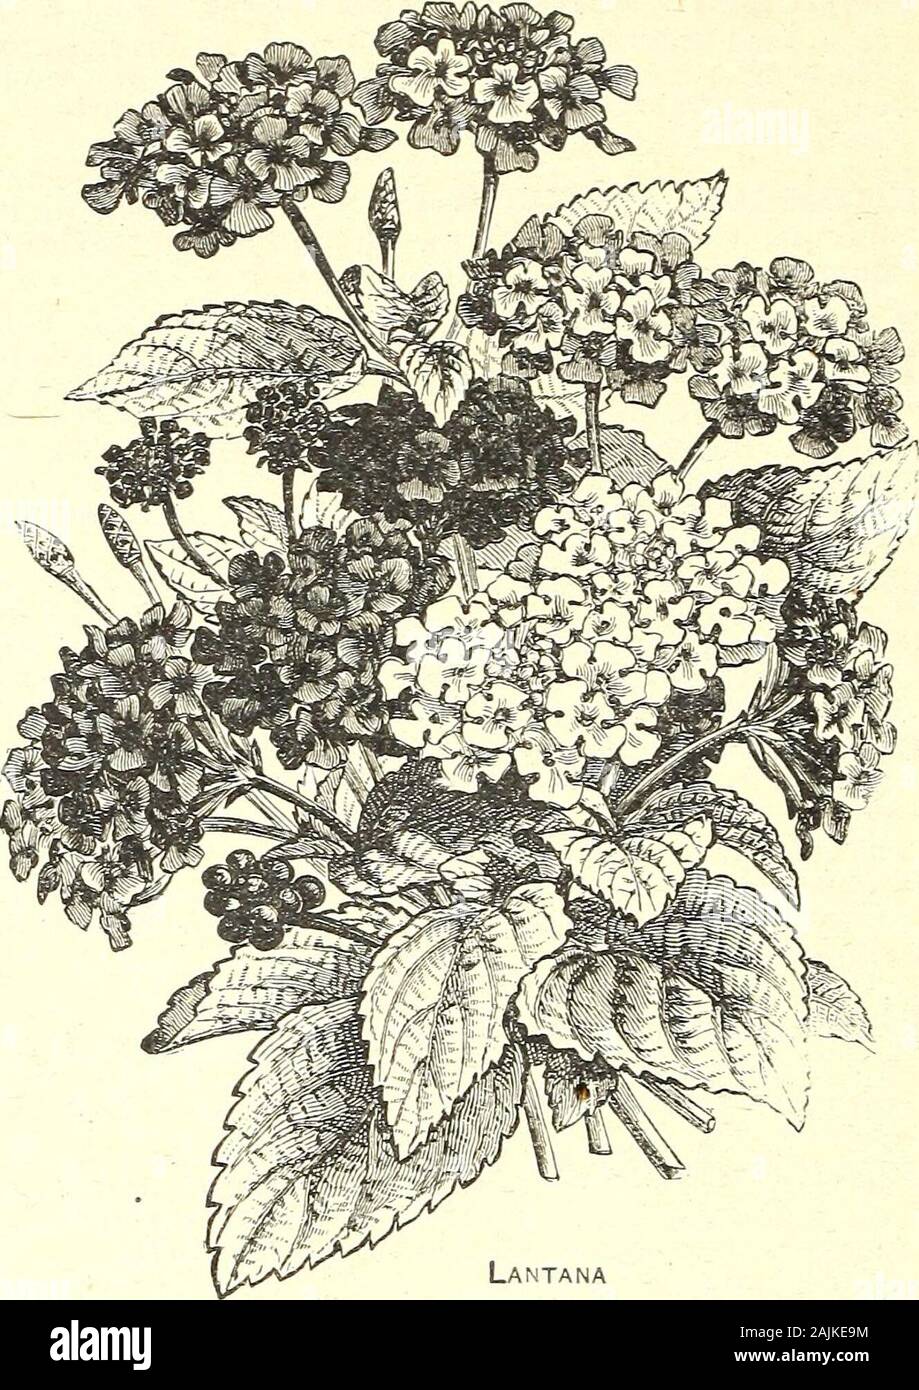 Seed annual 1908 . t high Pkt. 10c. LONDON PRDE—{See Lychnis Chalcedonica). Lophospermum Scandens gr^vfng^cifmb^ ers, reaching a height of ten or twelve feet; excellent forcovering trellis work. Flowers large and bright violetpurple. Tender perennial • Pkt. 10c. T nvipa drpiQS {Eragrostis elegans). A very pretty^-^ ^ ^ ^-** ciDO species of ornamental grass, growing one foot high; good for winter bouquets; hardy annual.Pkt. 5c.LOVE GROVE—(-See Nemophila). ¥ • li/E* J. i^^igeUa)- This sin- LOVG-m-SL-lVllSL S^^^r plant is alsoM^Jir%^ AAA «A J.TAA01. known as Lady-in-the- Green and as De%il-in-a Stock Photo